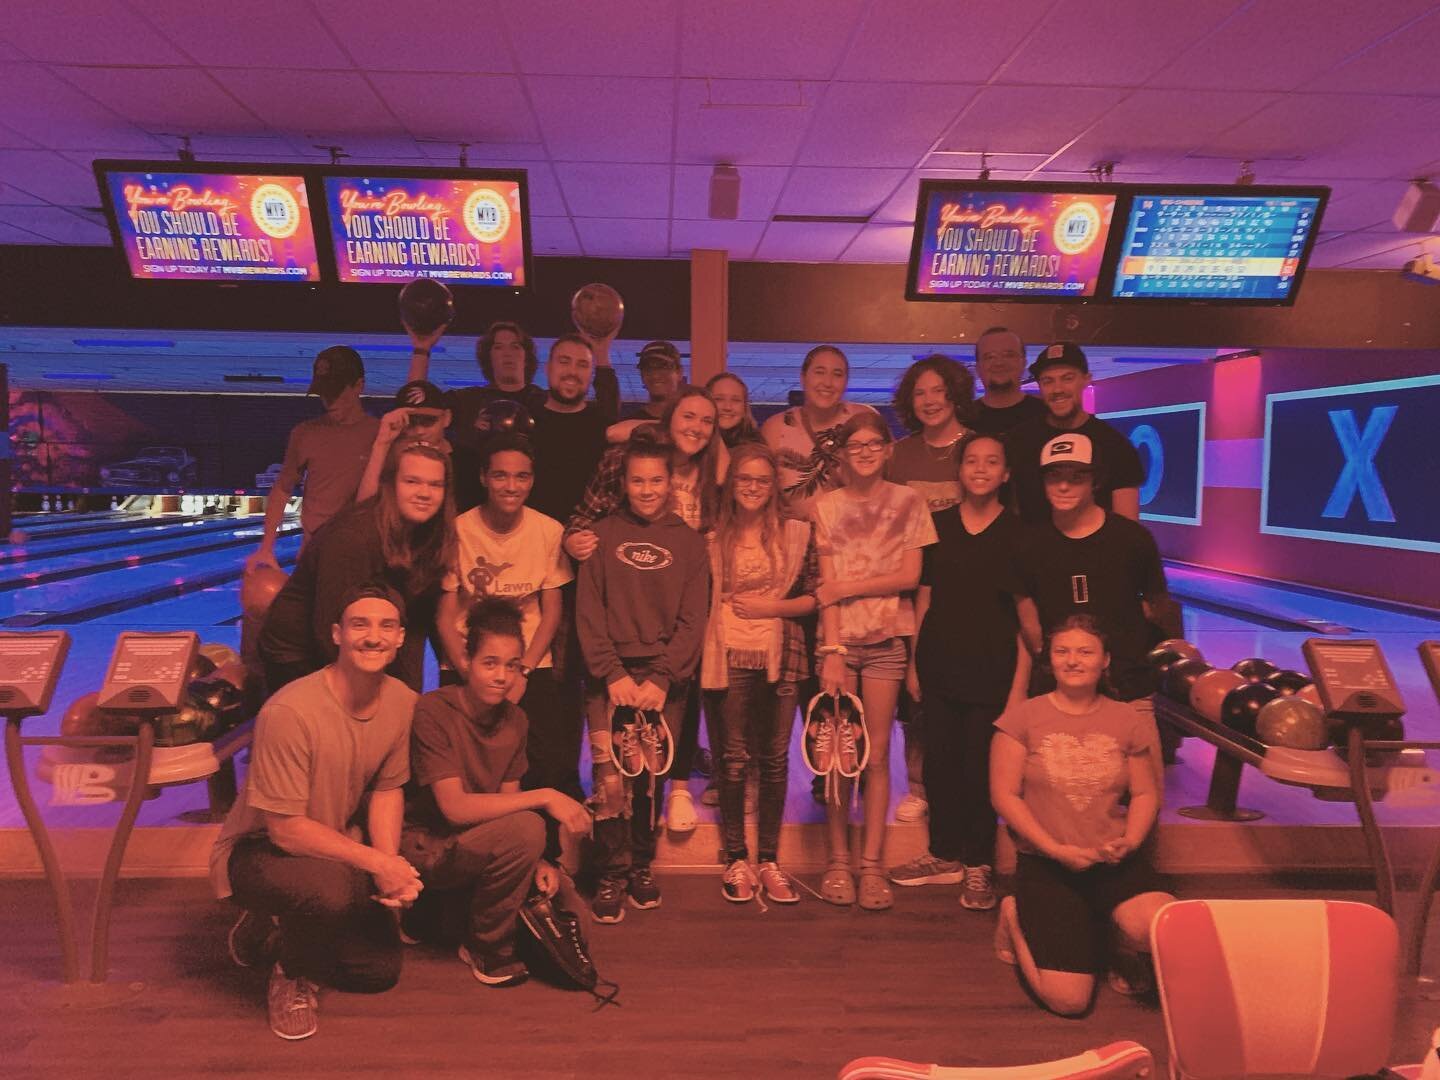 The gang was rippin&rsquo; strikes last night! So much fun bowling 🎳

See you August 10 for our next hangout 🤘🏻